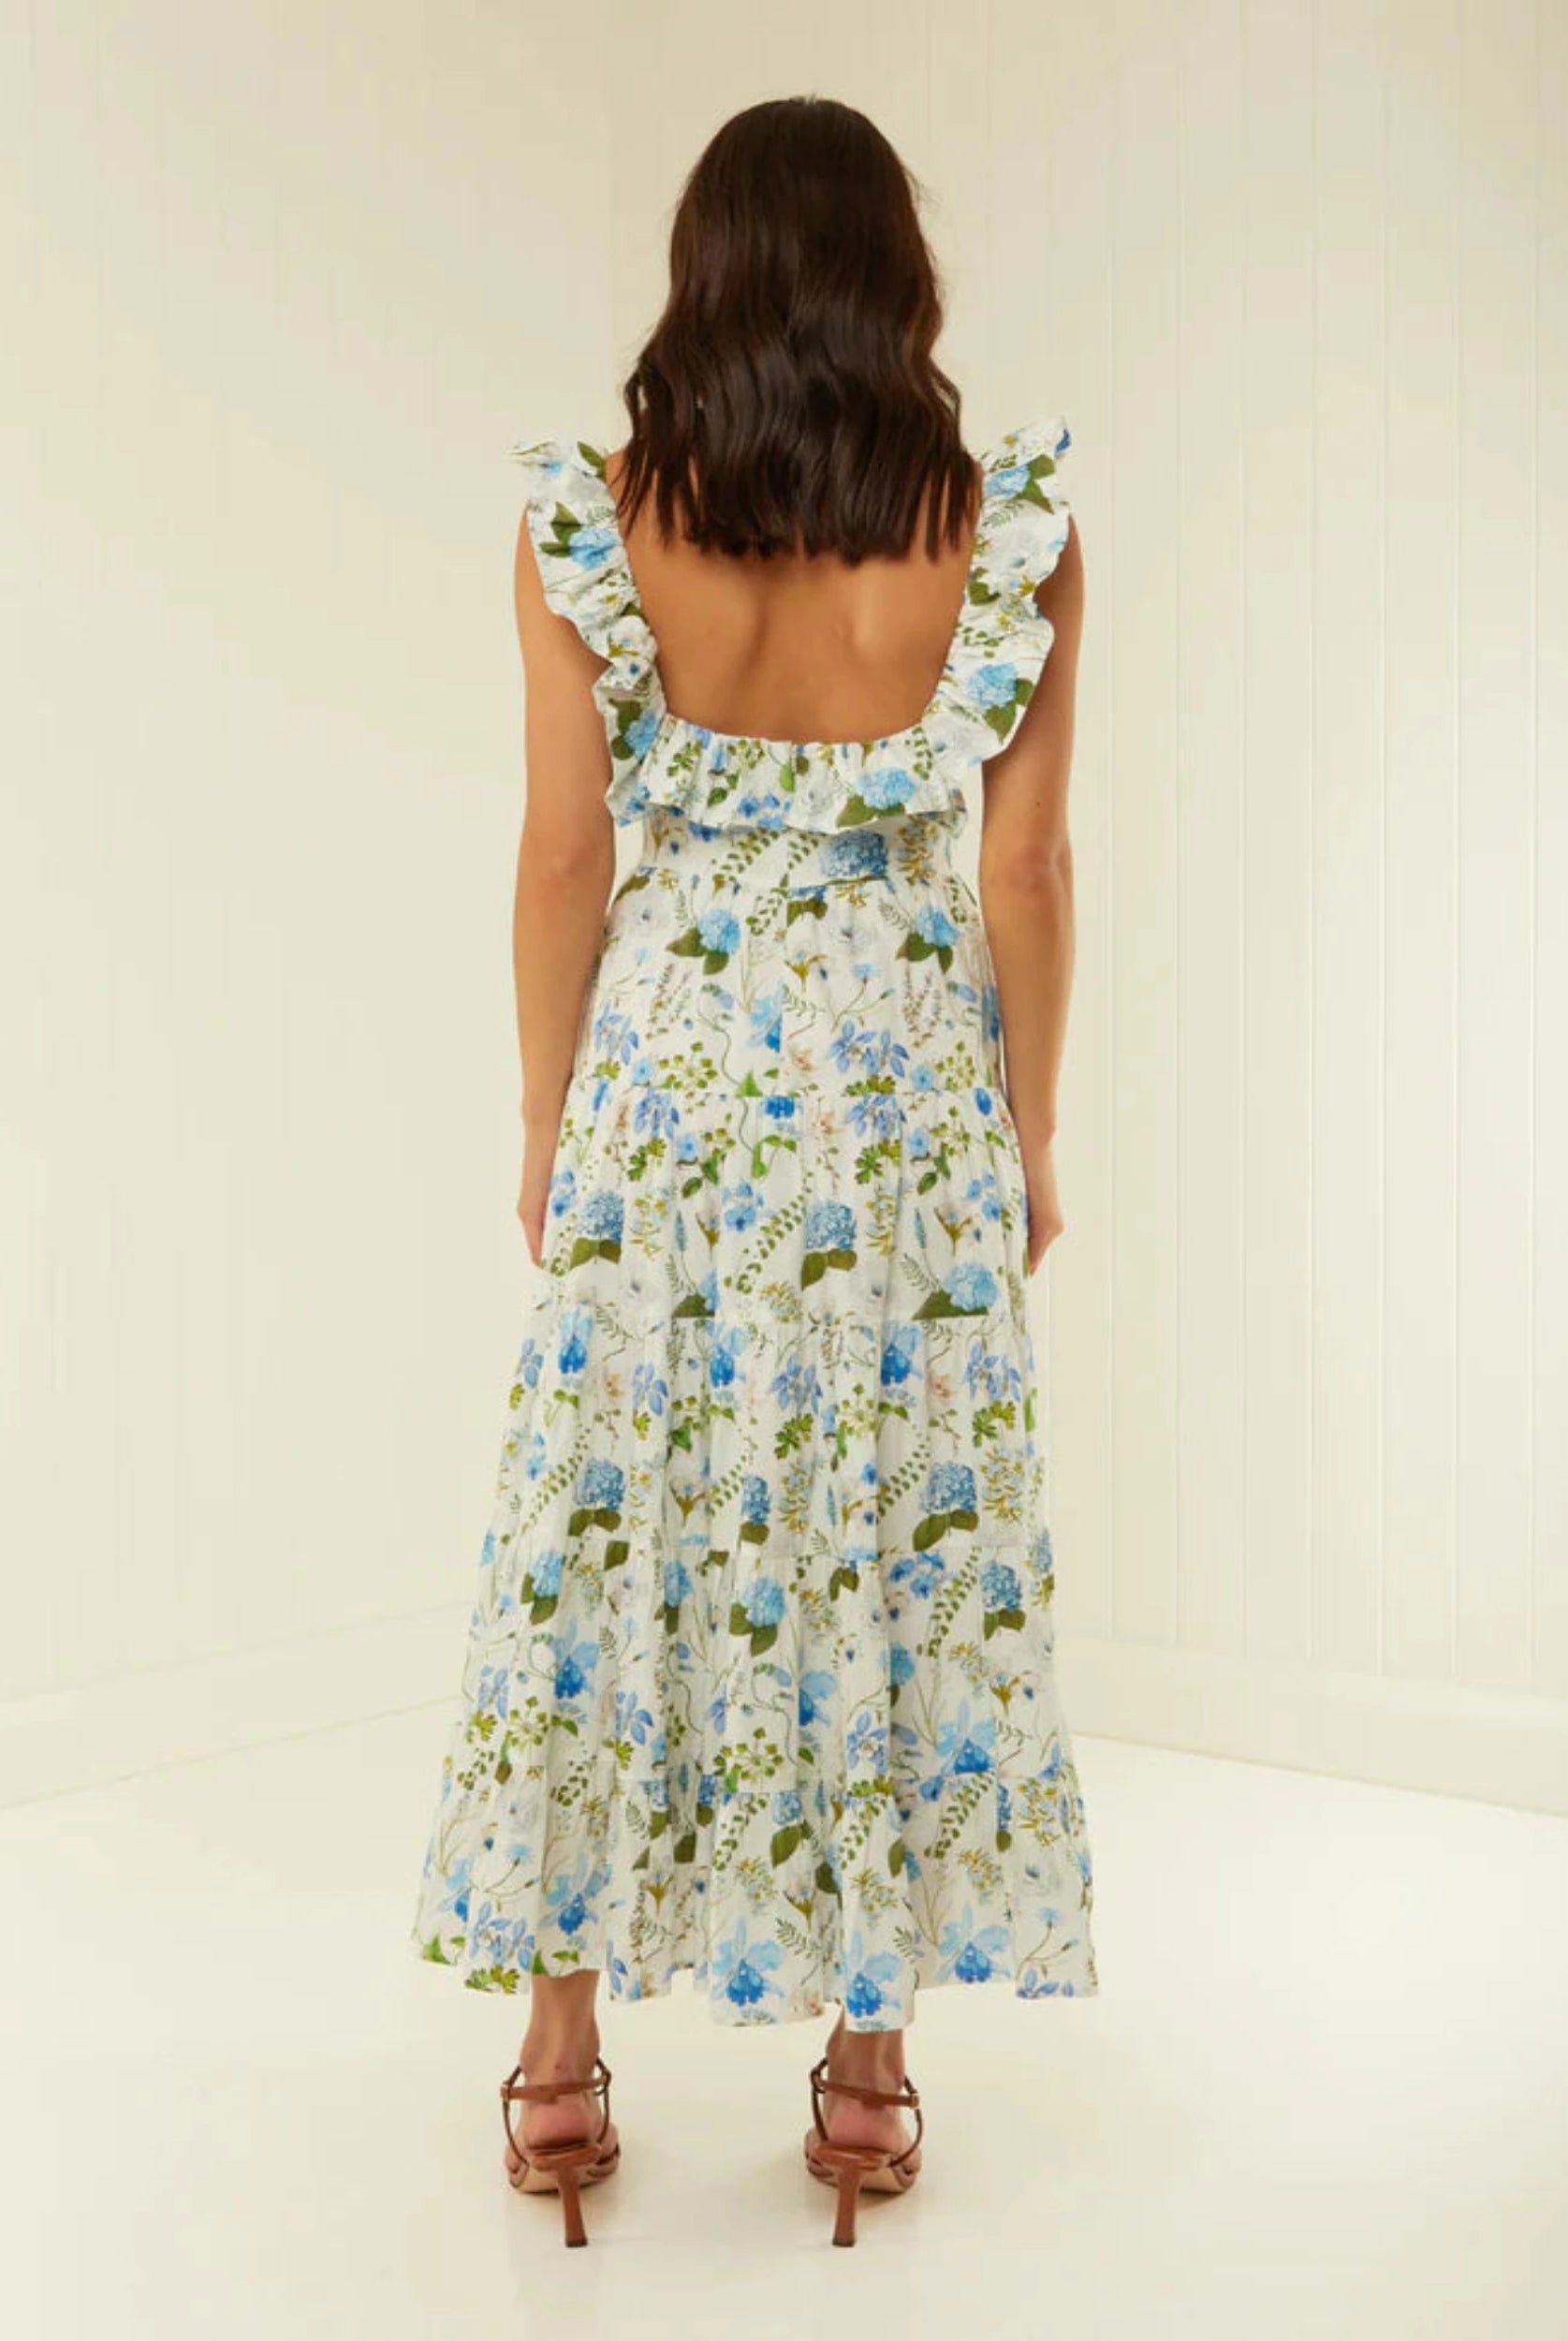 Floral print leon dress with ruffles at neckline